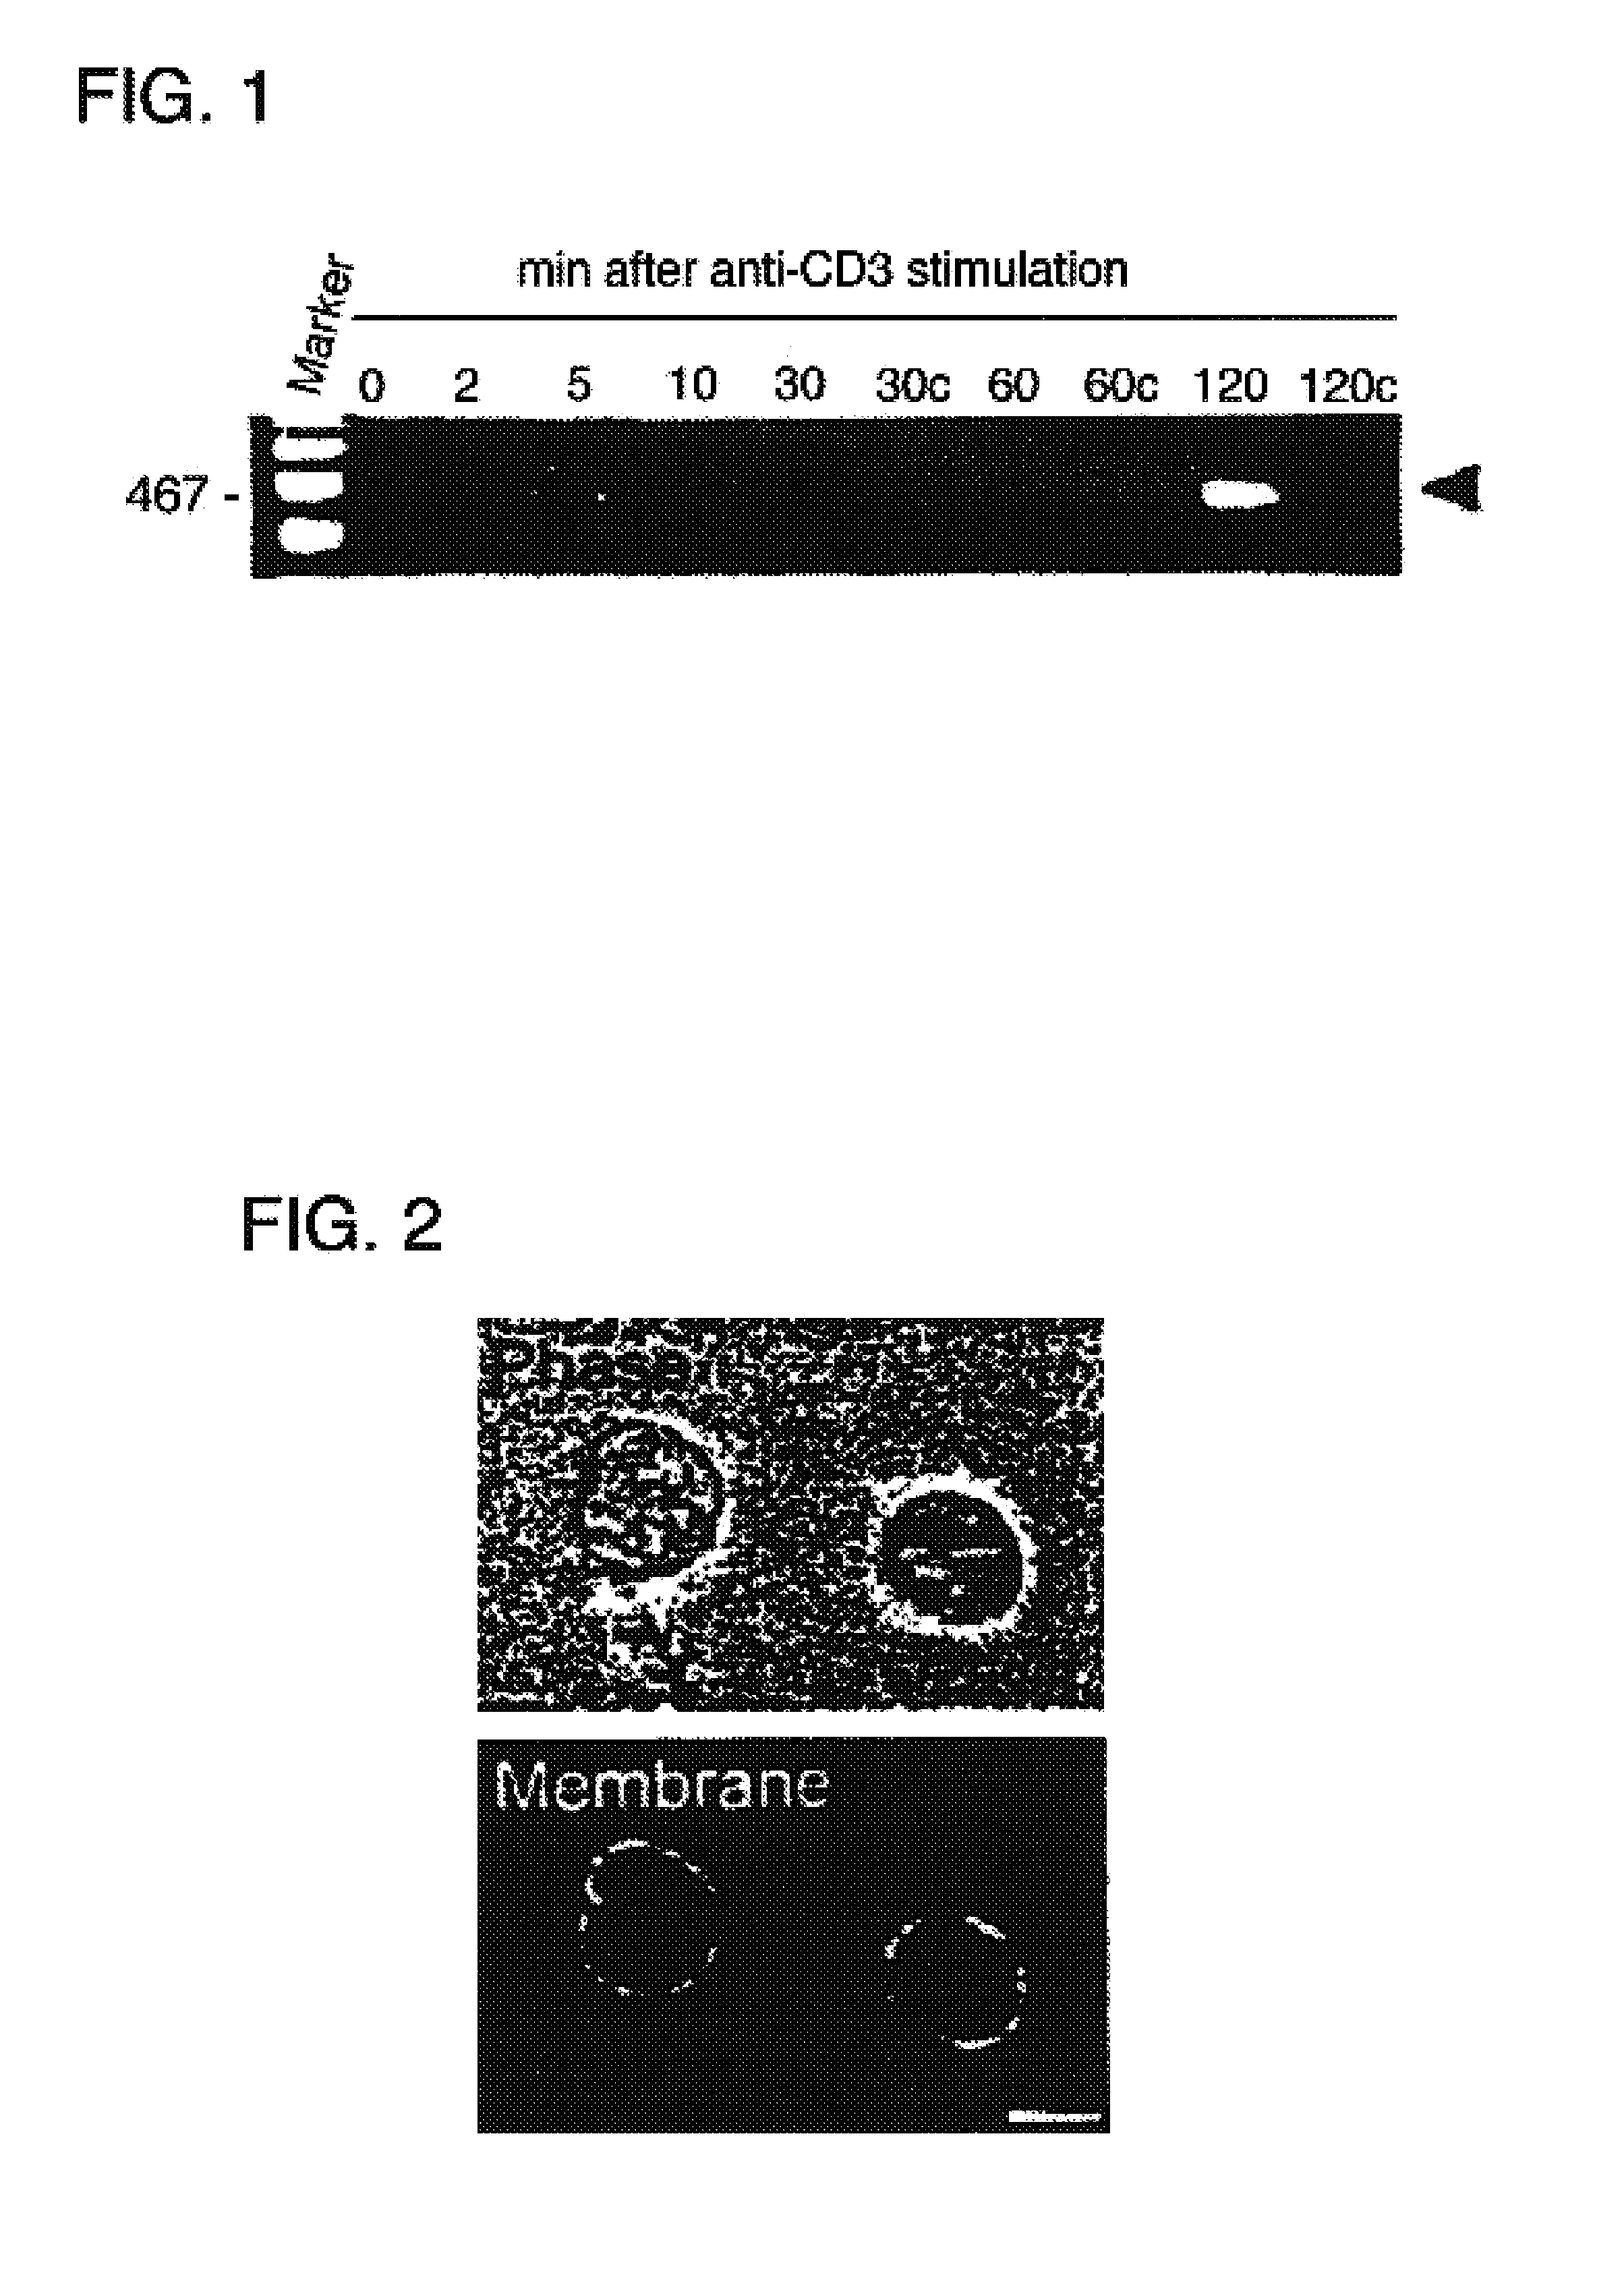 Methods for altering cell fate to generate T-cells specific for an antigen of interest